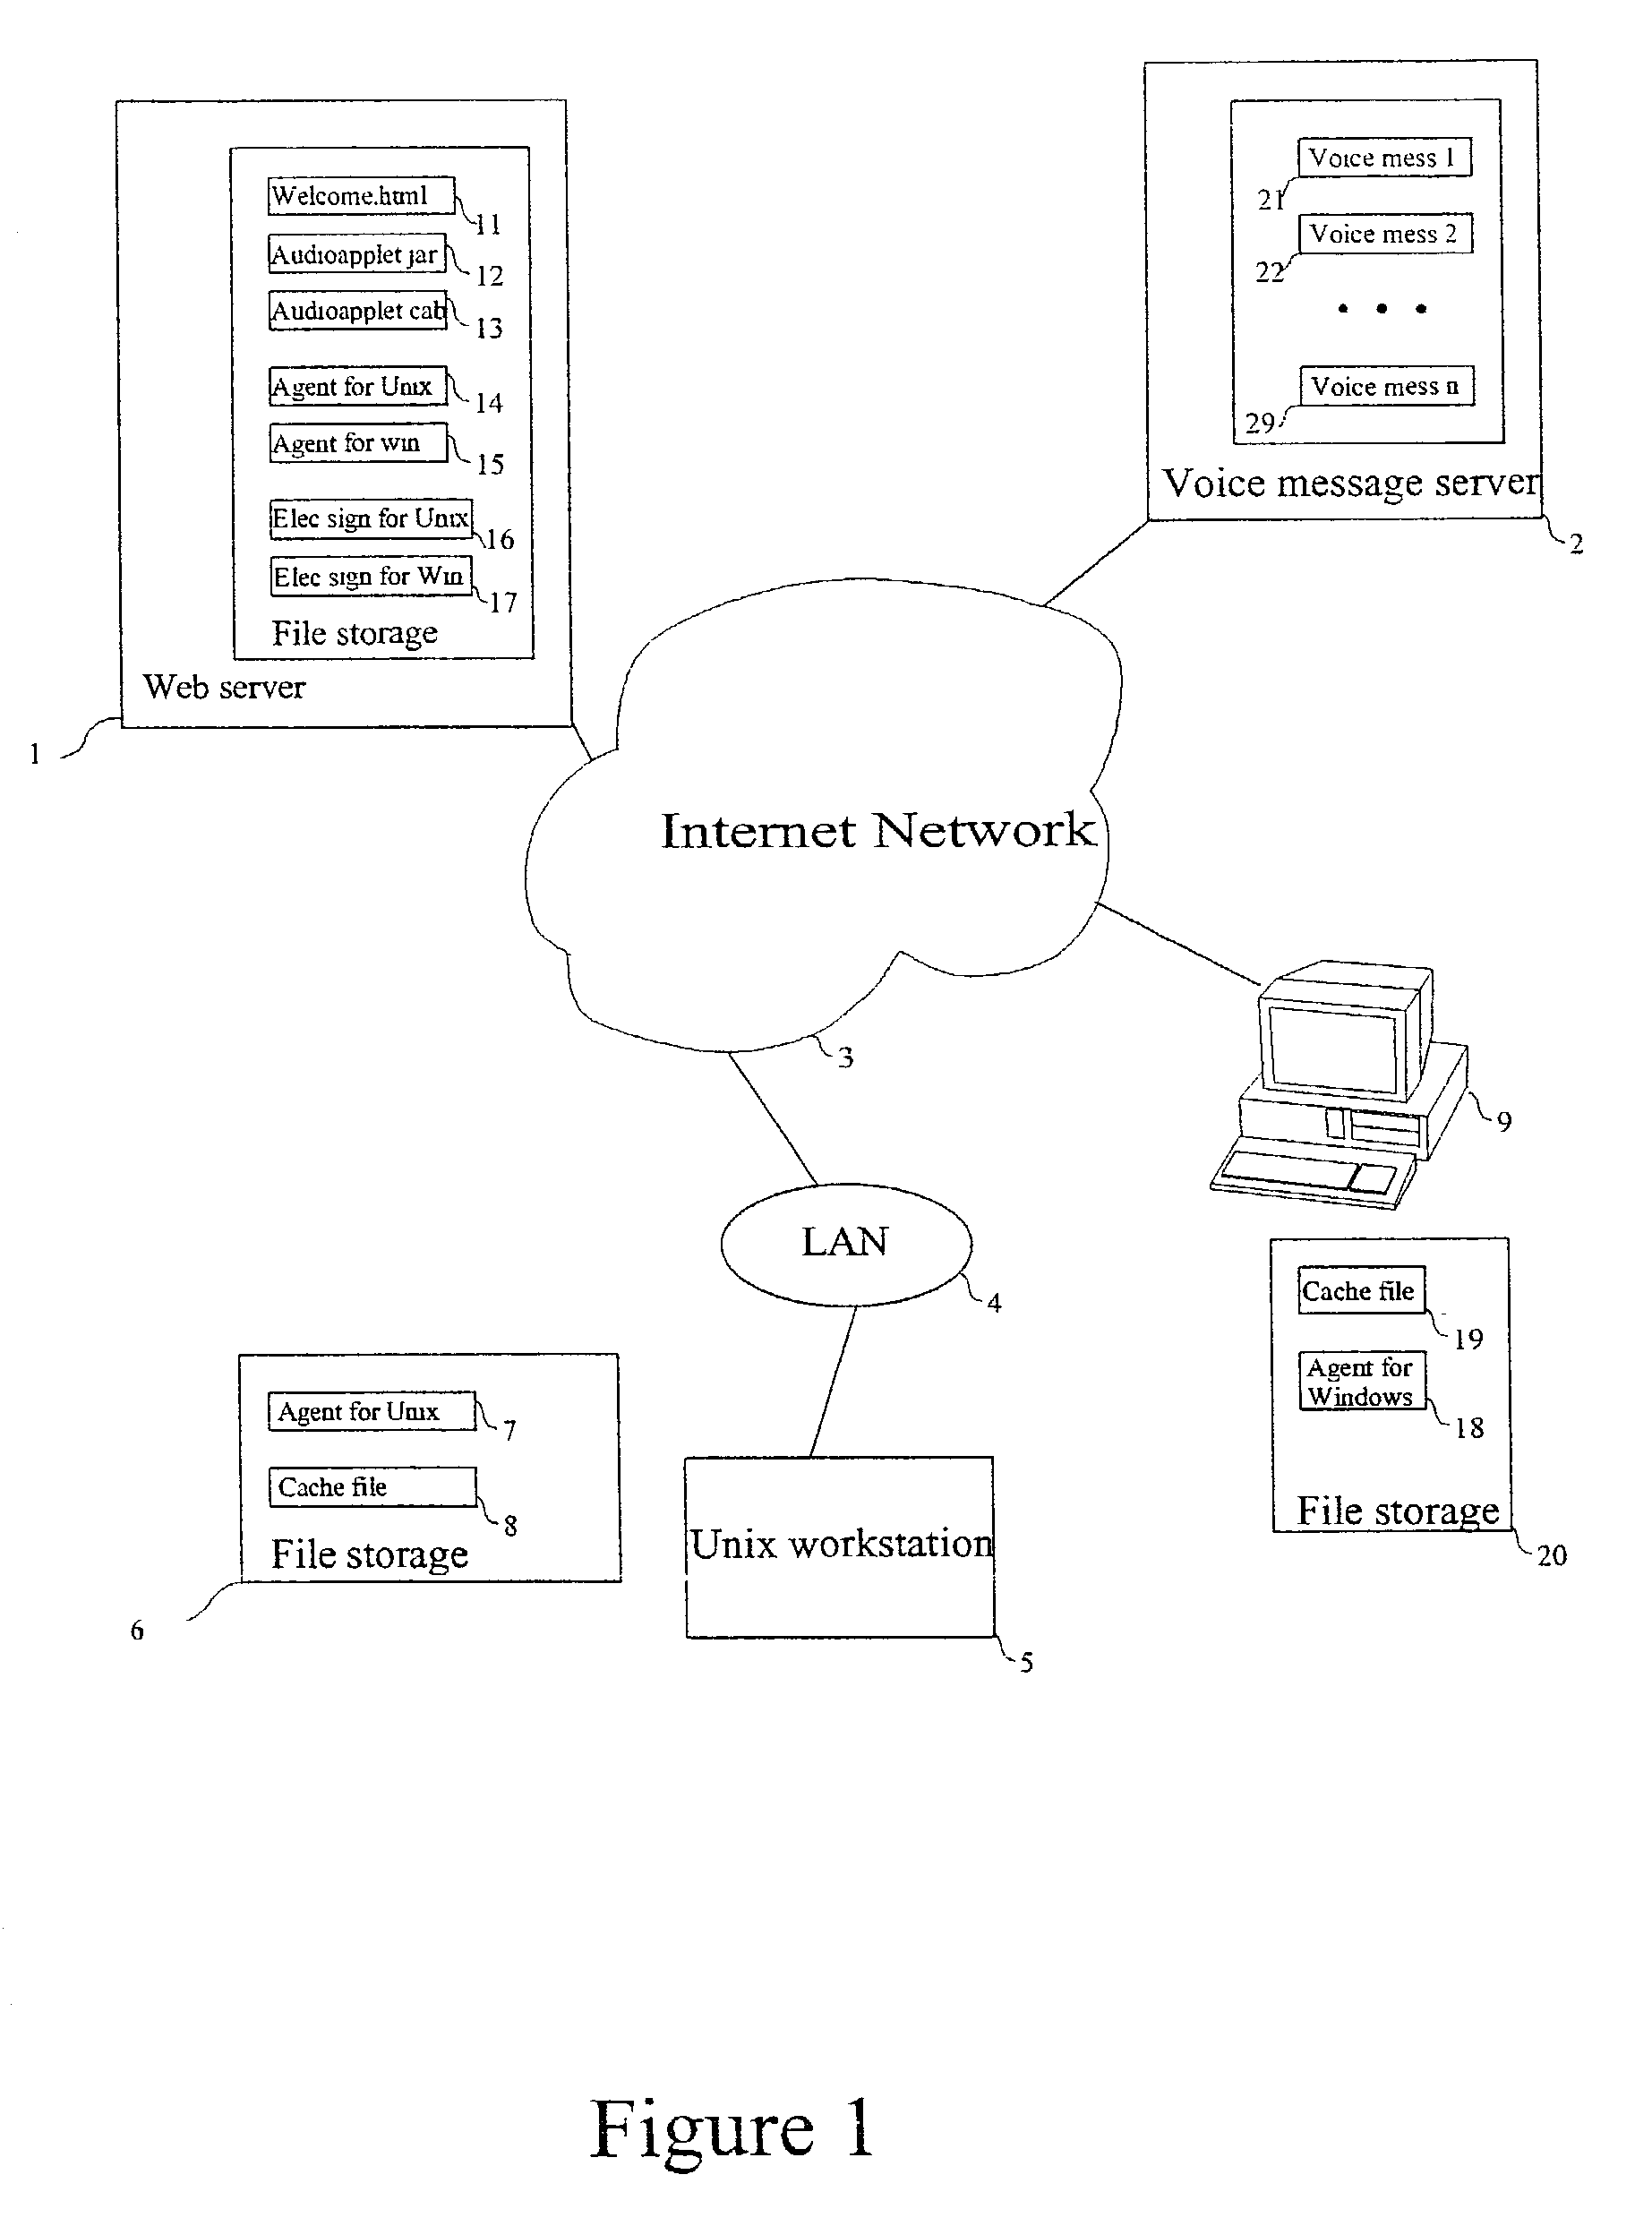 Process of communication between an applet and a local Agent using a Socket communication channel